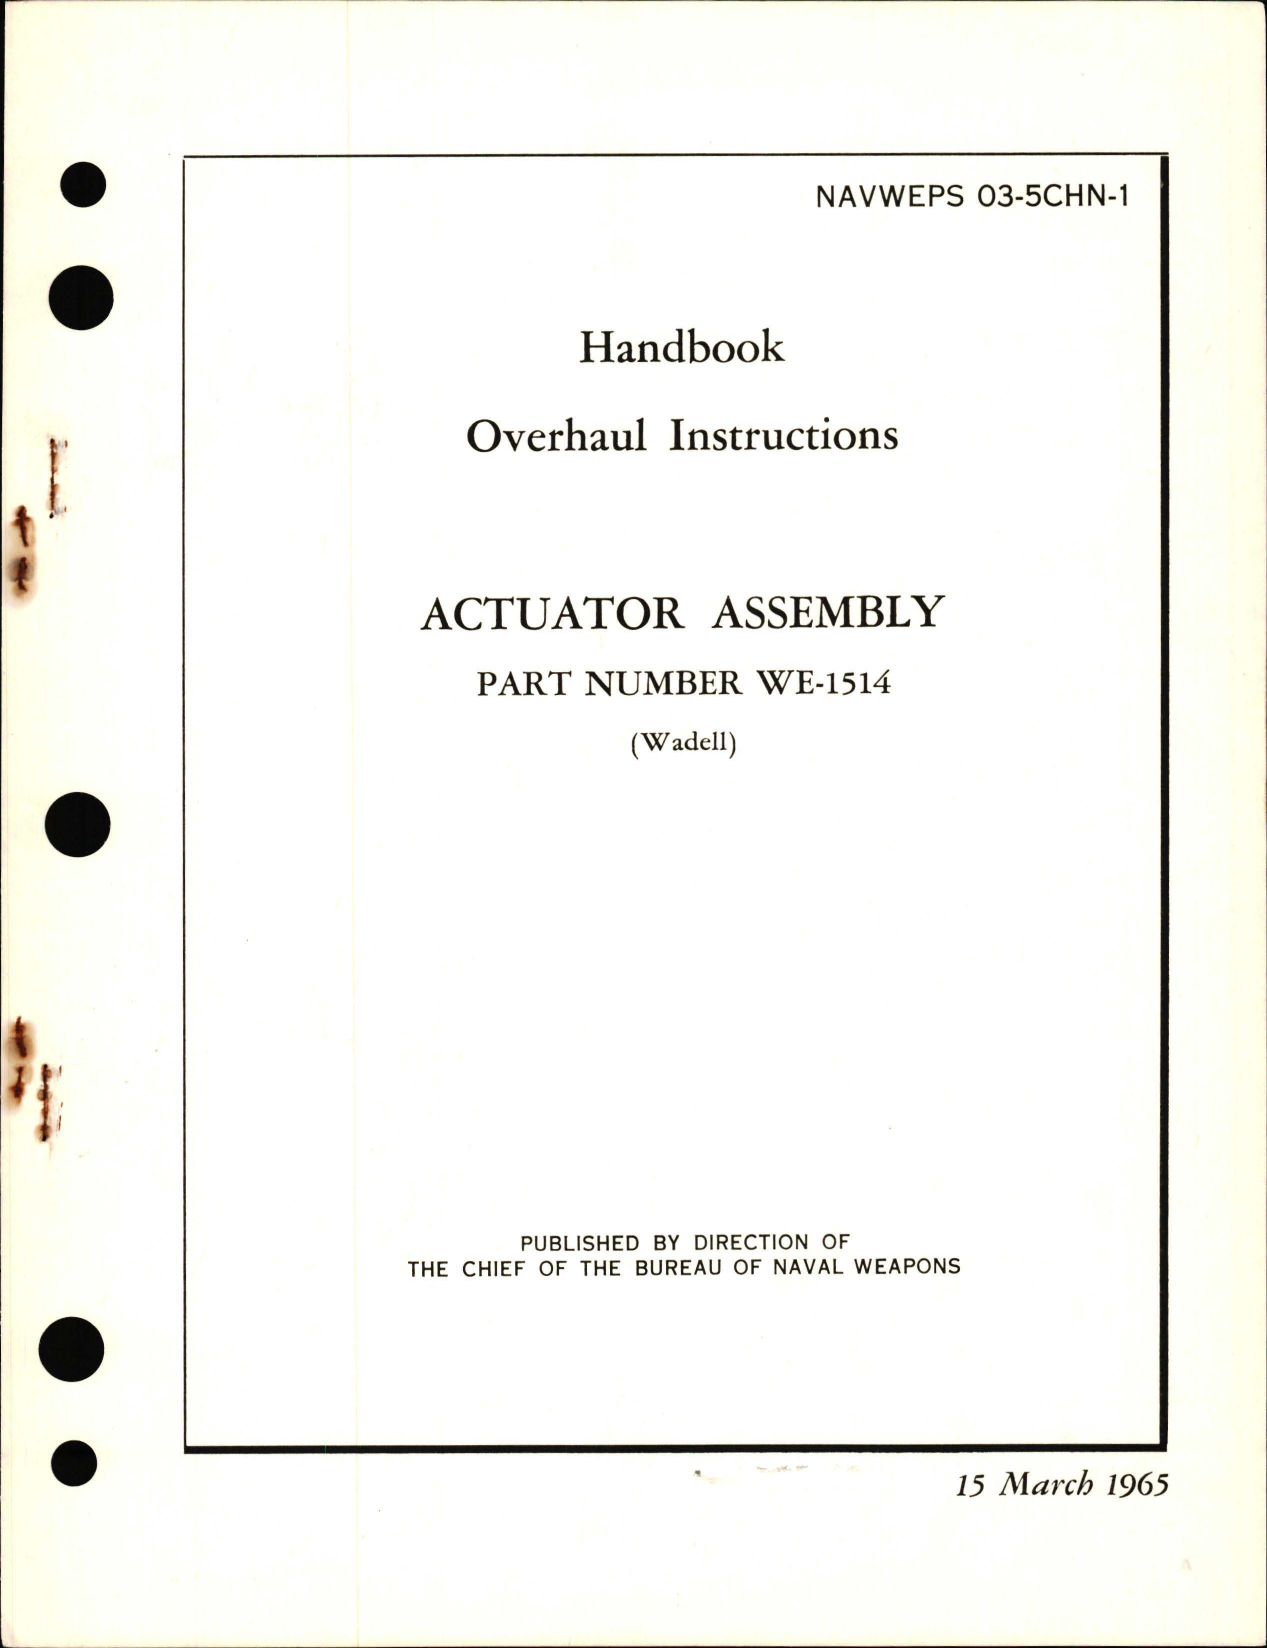 Sample page 1 from AirCorps Library document: Overhaul Instructions for Actuator Assembly WE-1514